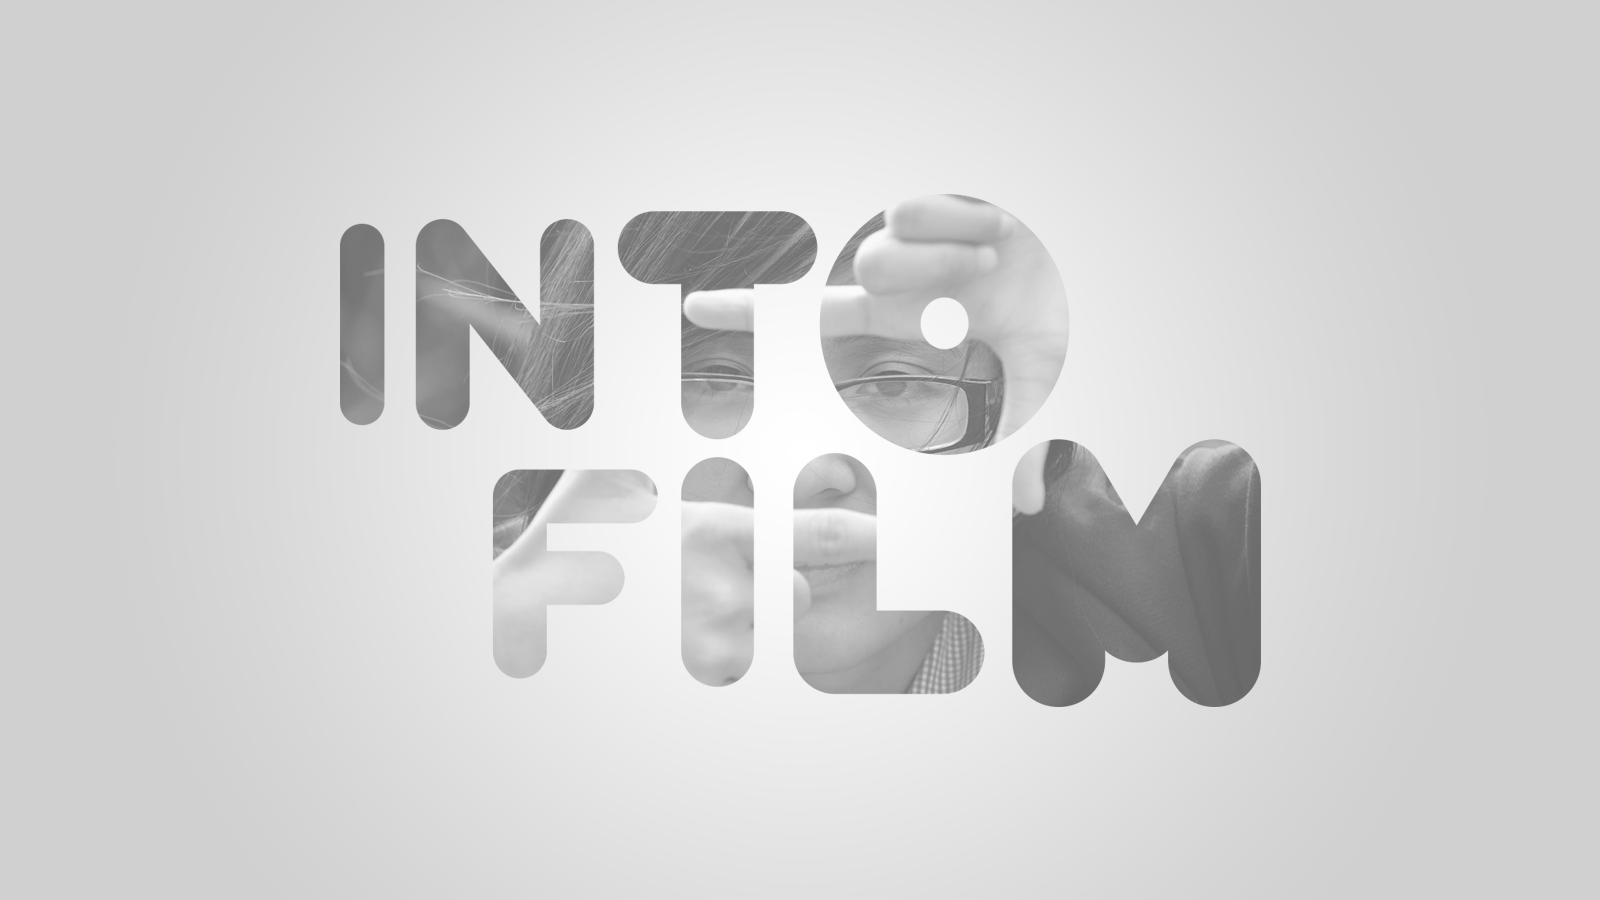 Partnering with Into Film